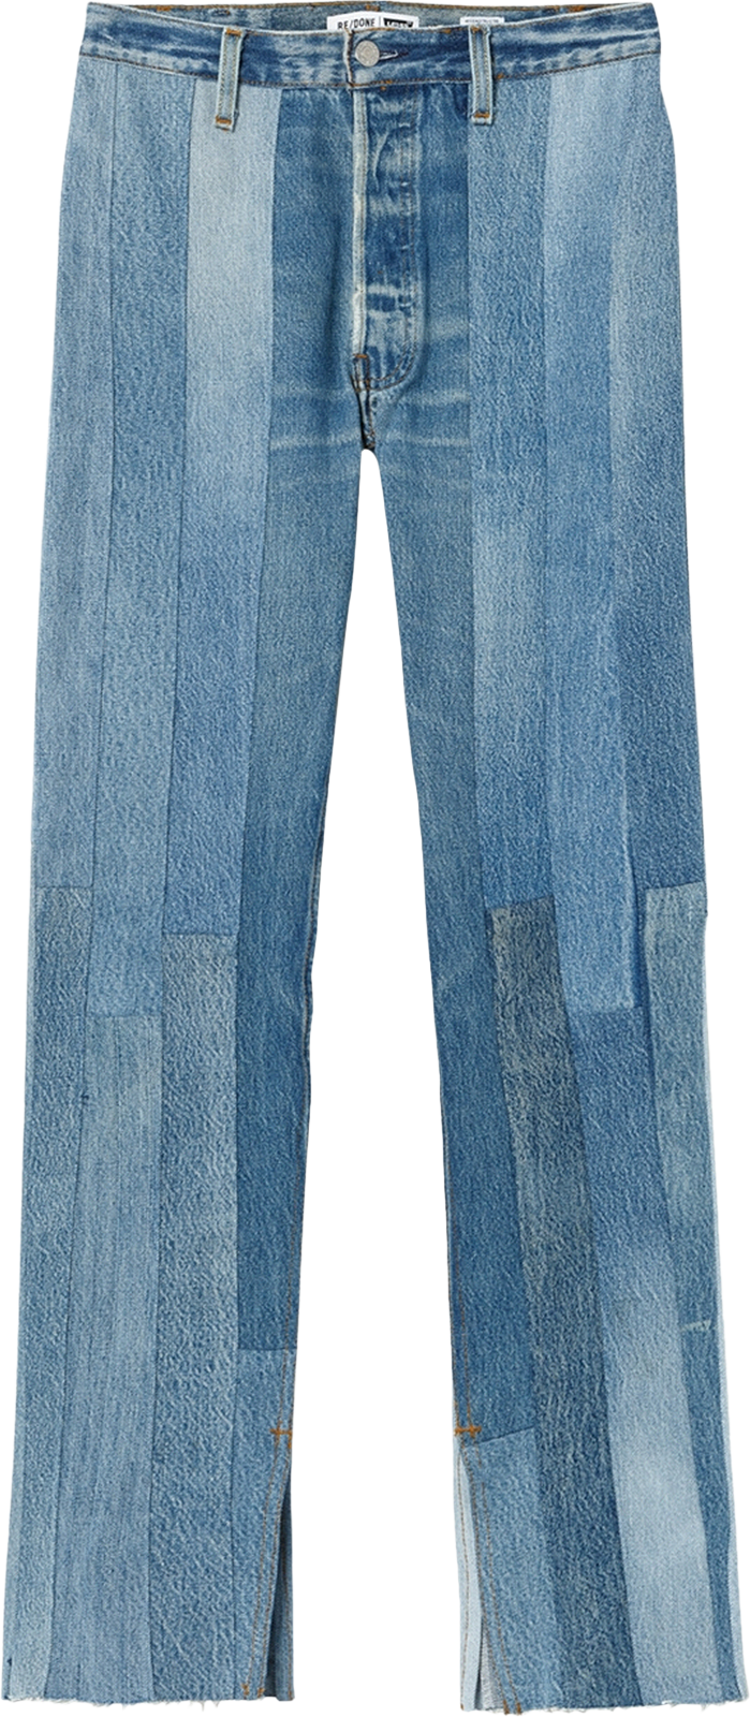 2020 pre-owned patchwork cropped jeans